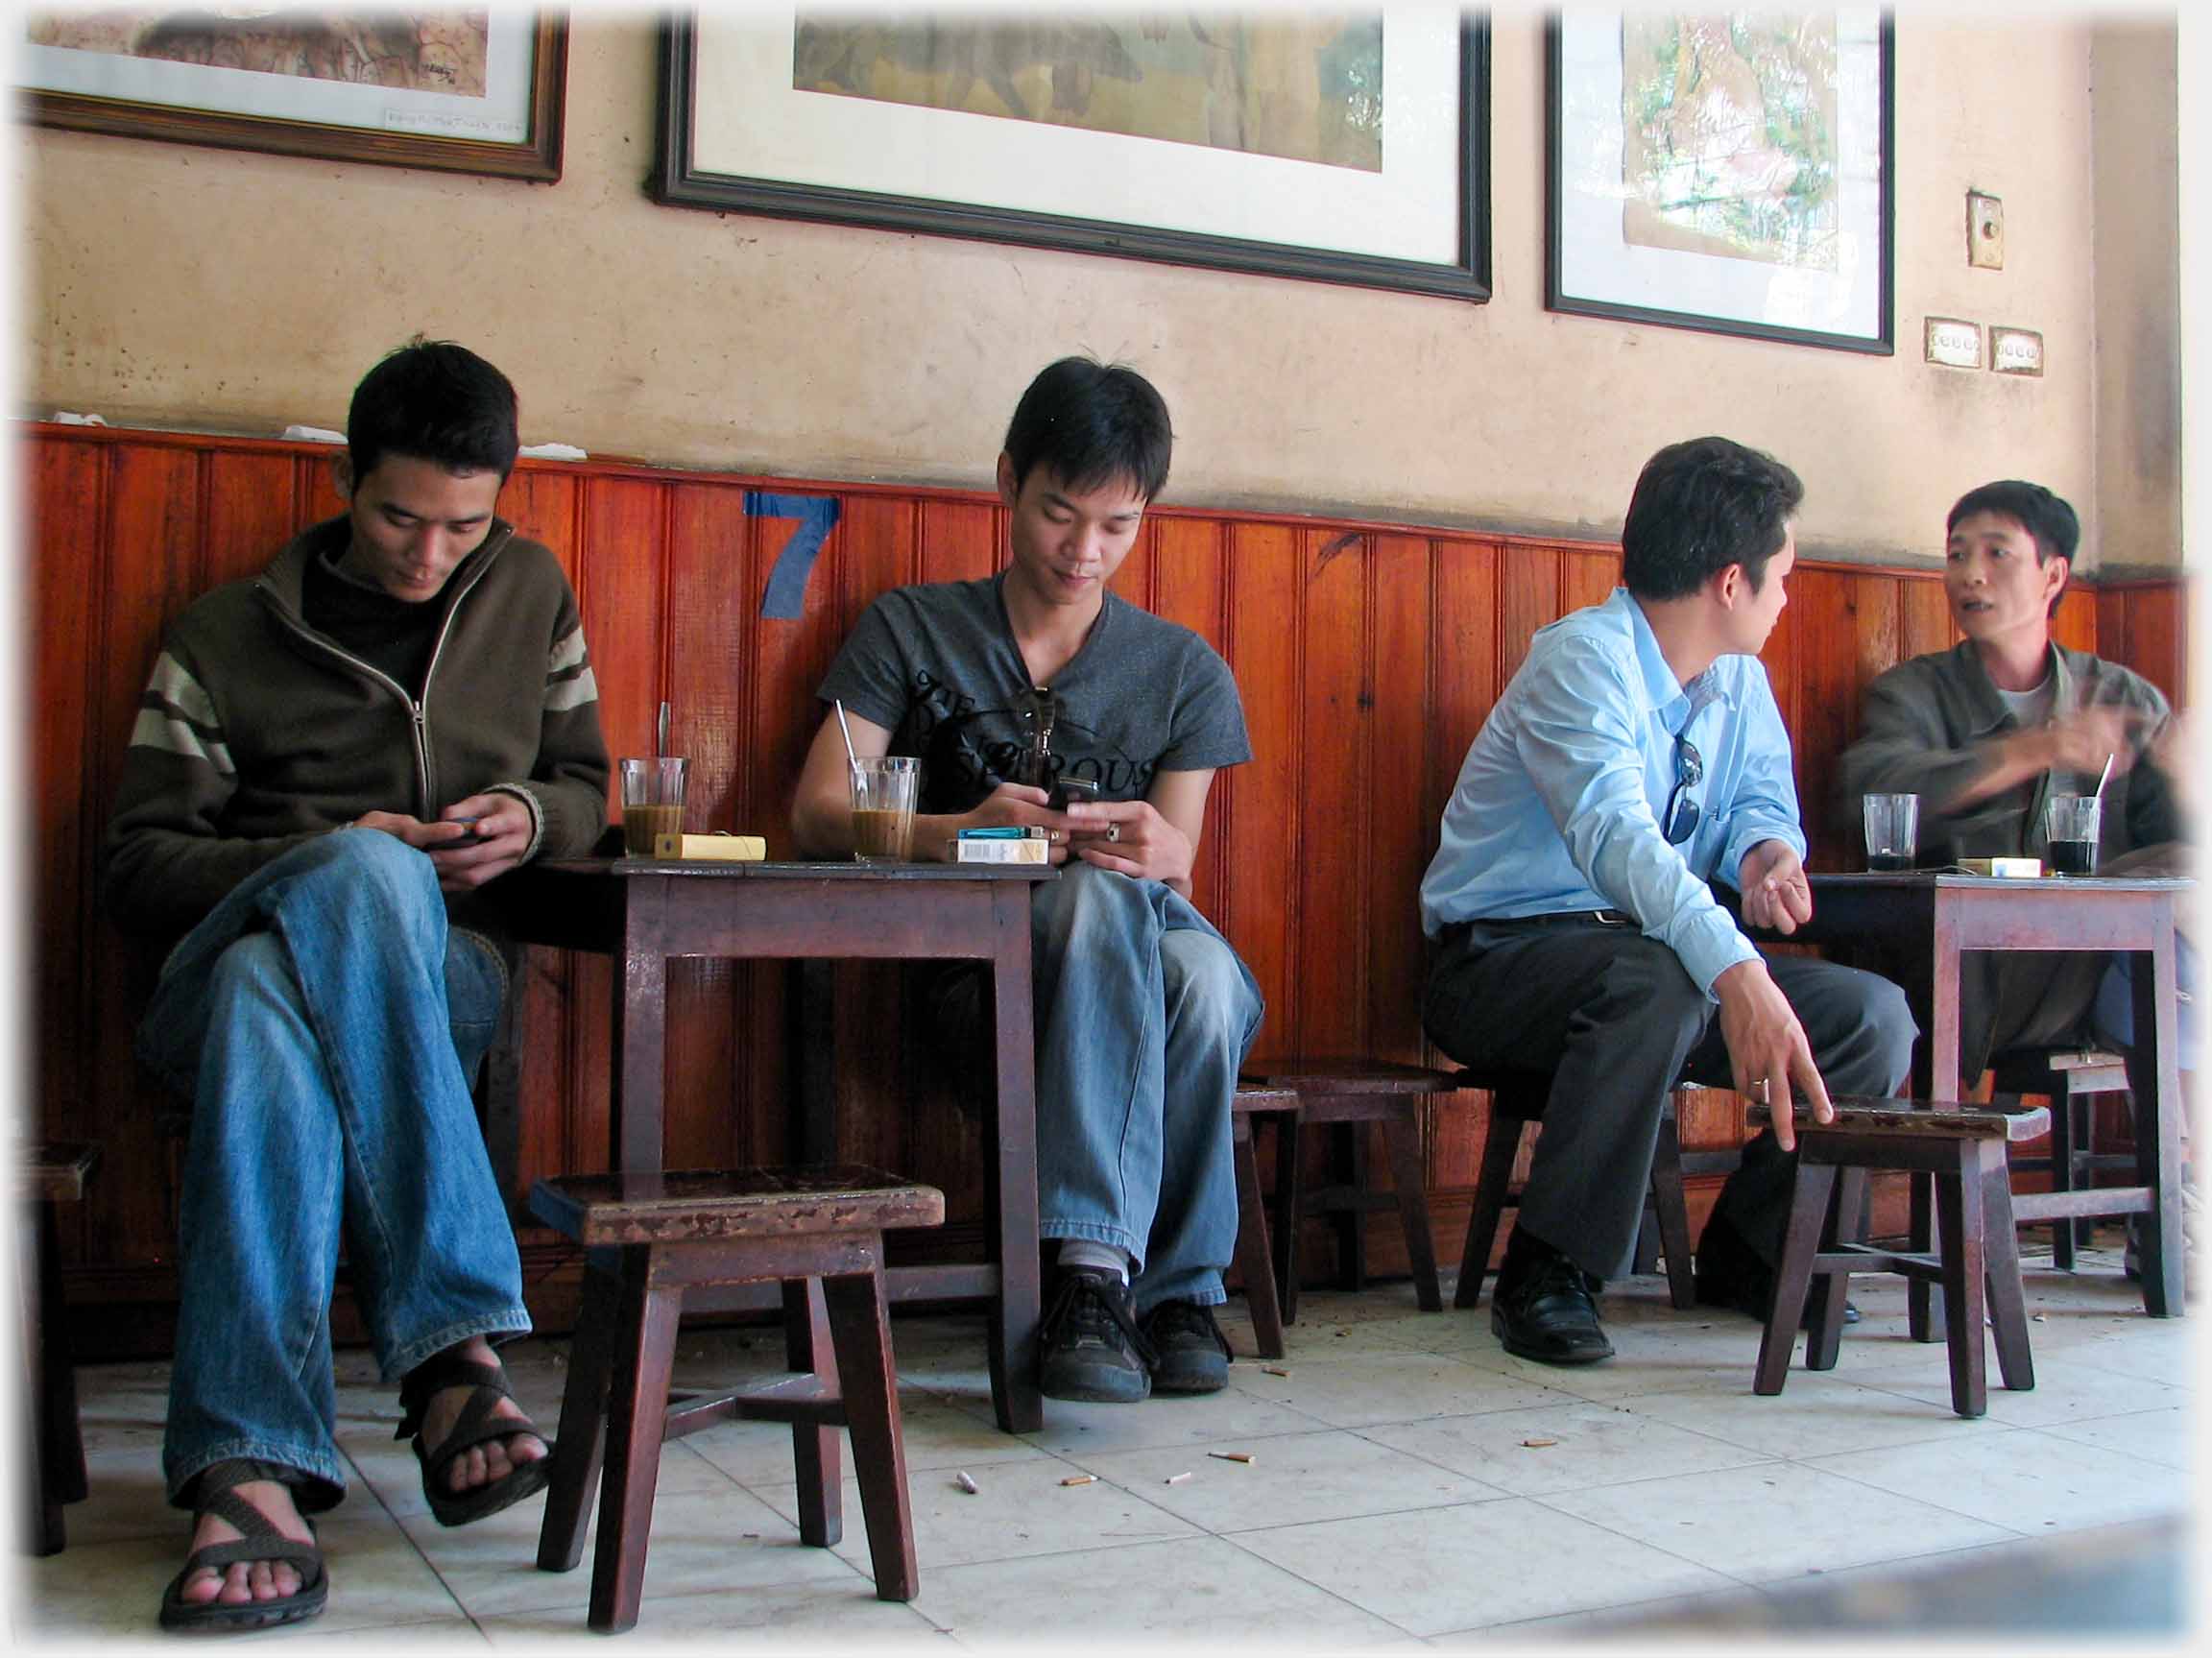 Two men together at a table separately texting, two further men at another table conversing.